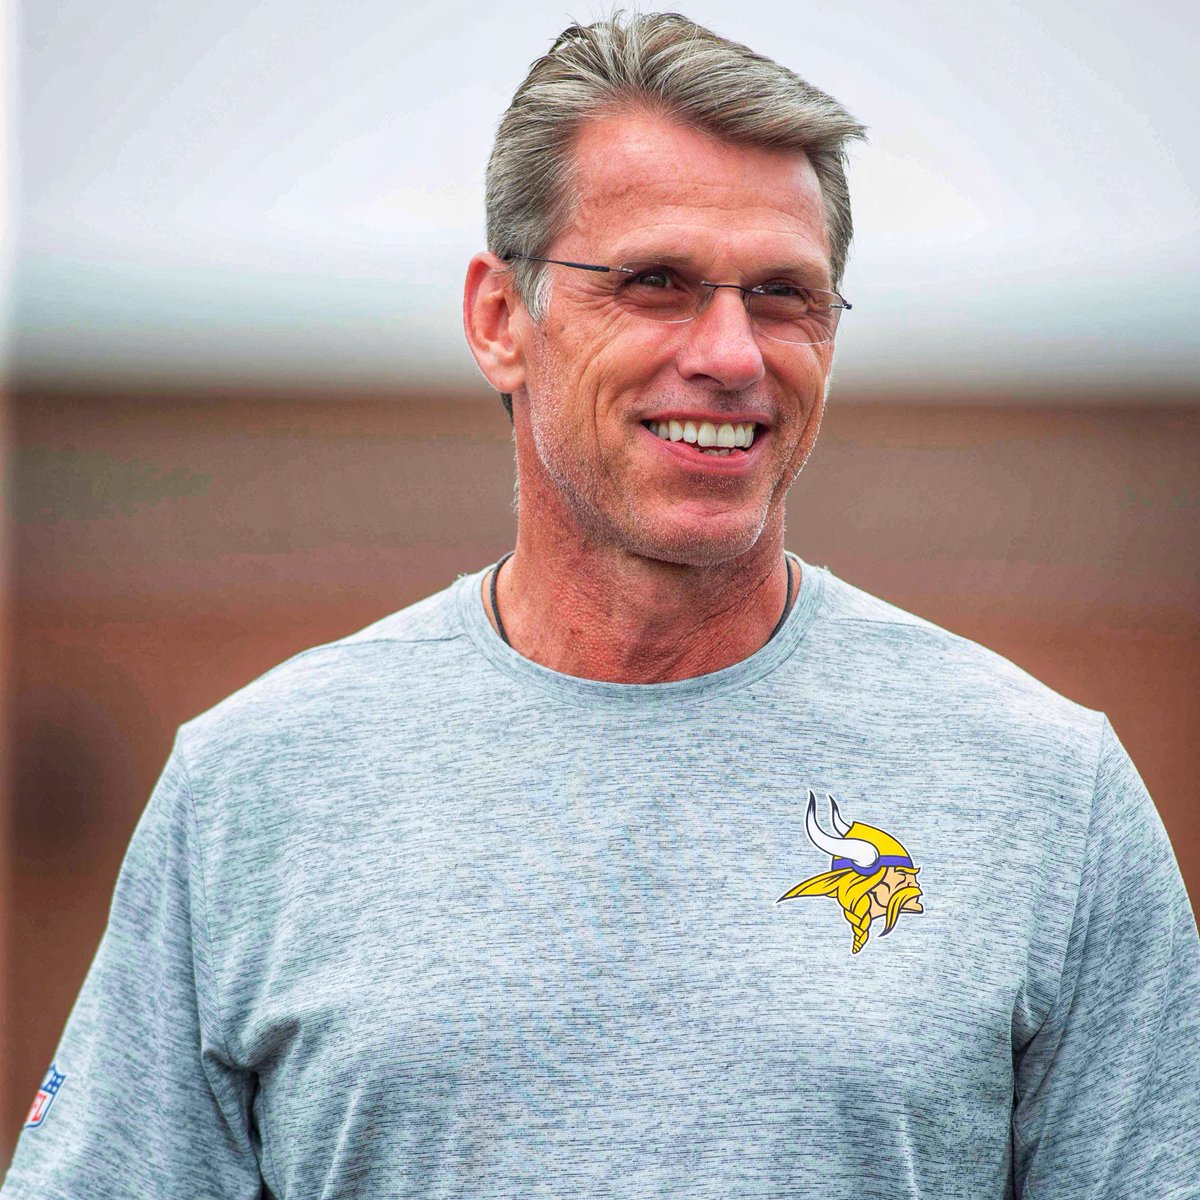 Former #Vikings GM Rick Spielman thinks three firsts and a third could land Minnesota the No. 3 pick, while the No. 4 pick would either cost three firsts or two firsts and Jefferson. “If you want a quarterback, which you don’t have, it’s gonna cost you.” (@The33rdTeamFB)